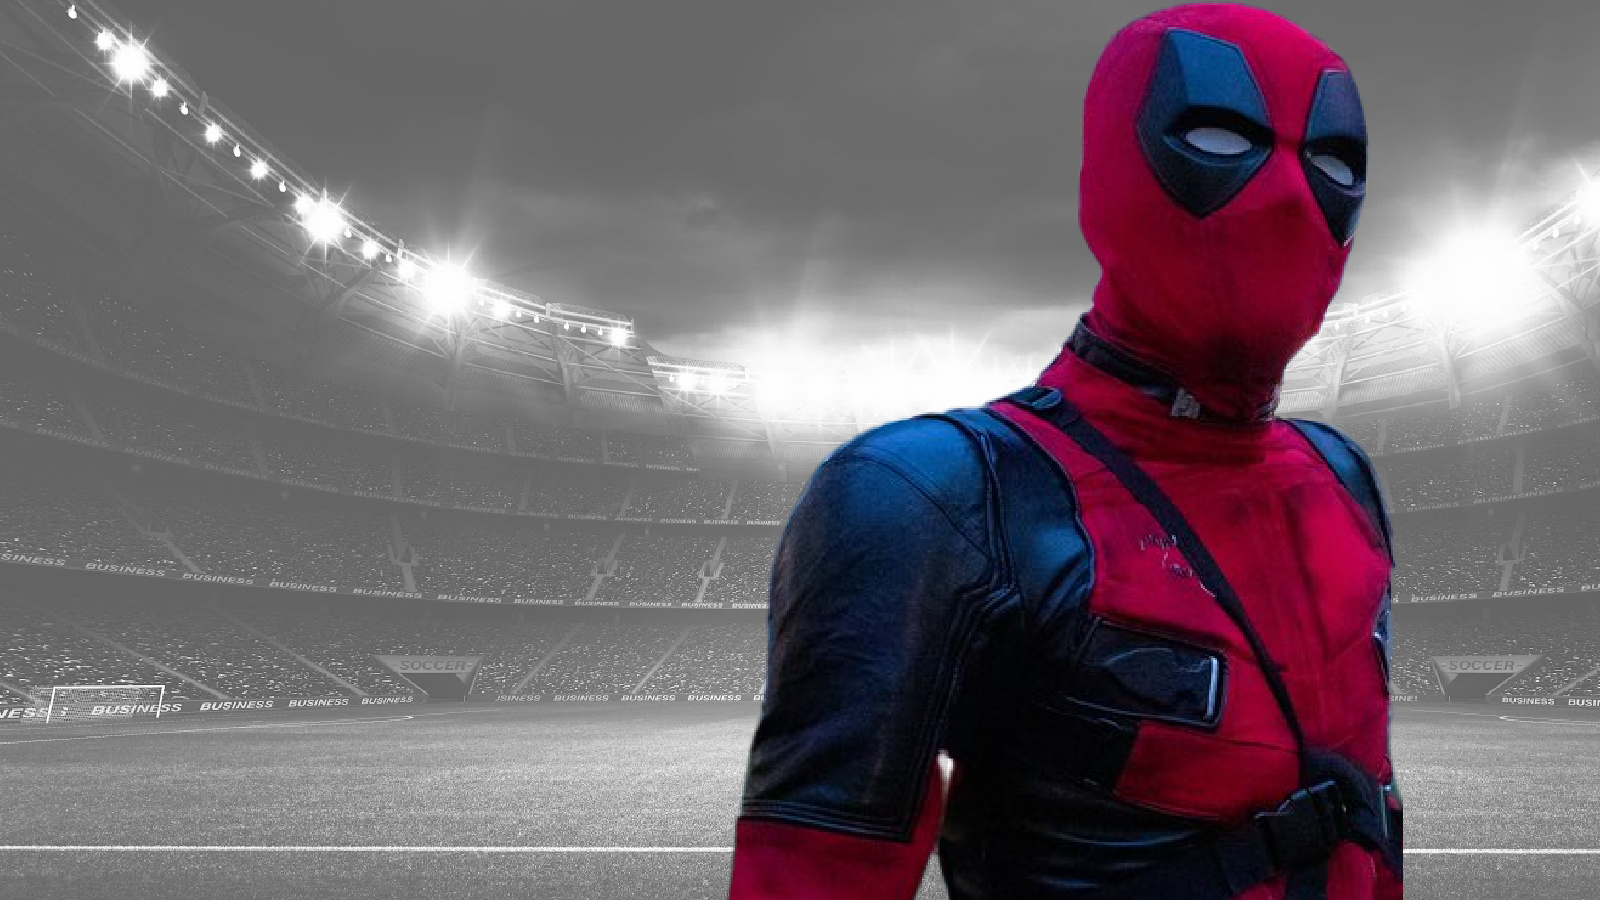 Video: Artem Dzyuba collects champions medal in full Deadpool costume